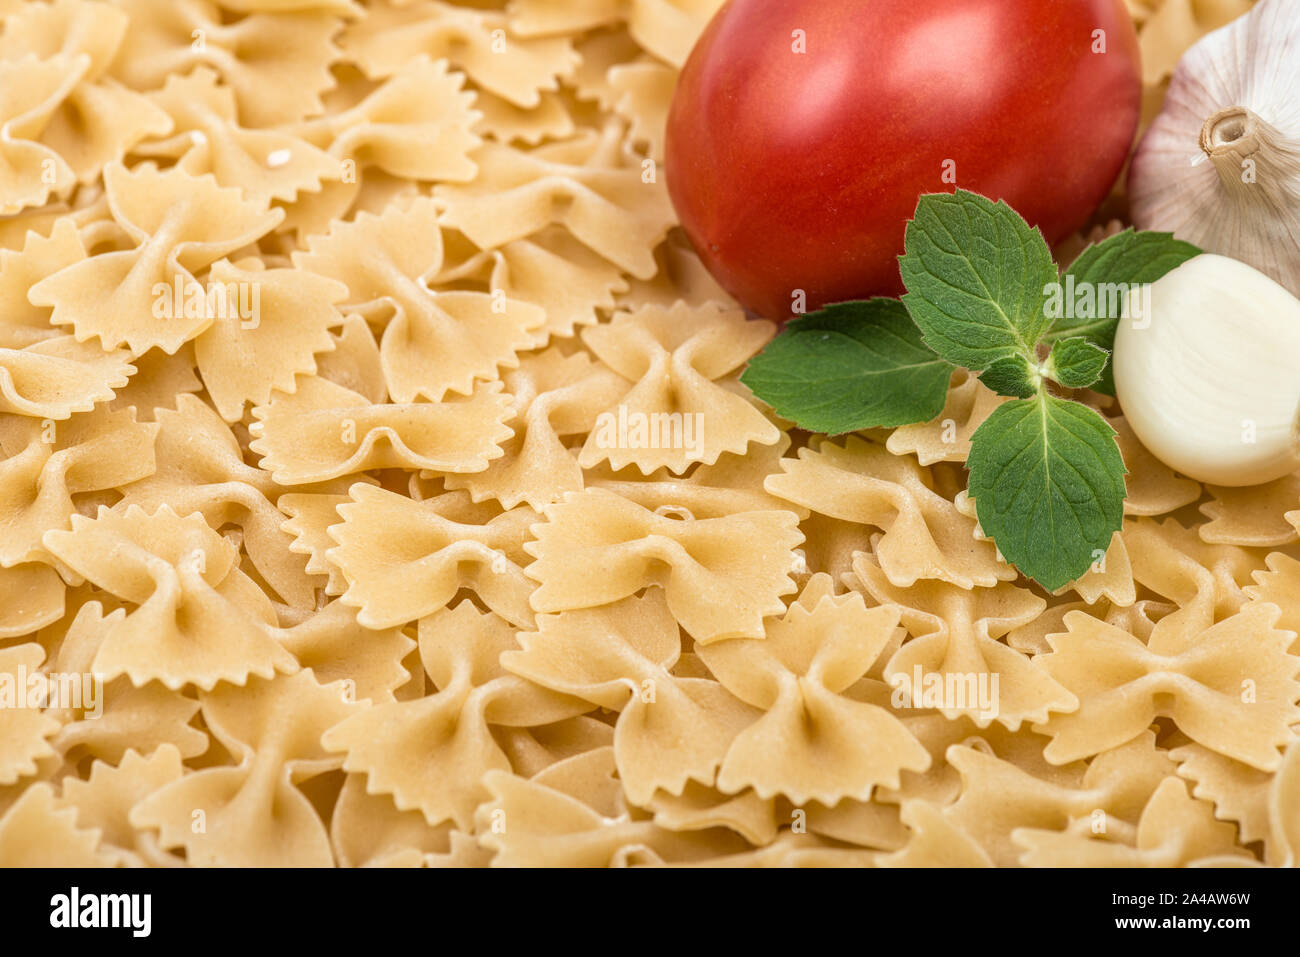 Pasta cooking ingredients. Italian farfalle with vegetables and herbs. Food background Stock Photo